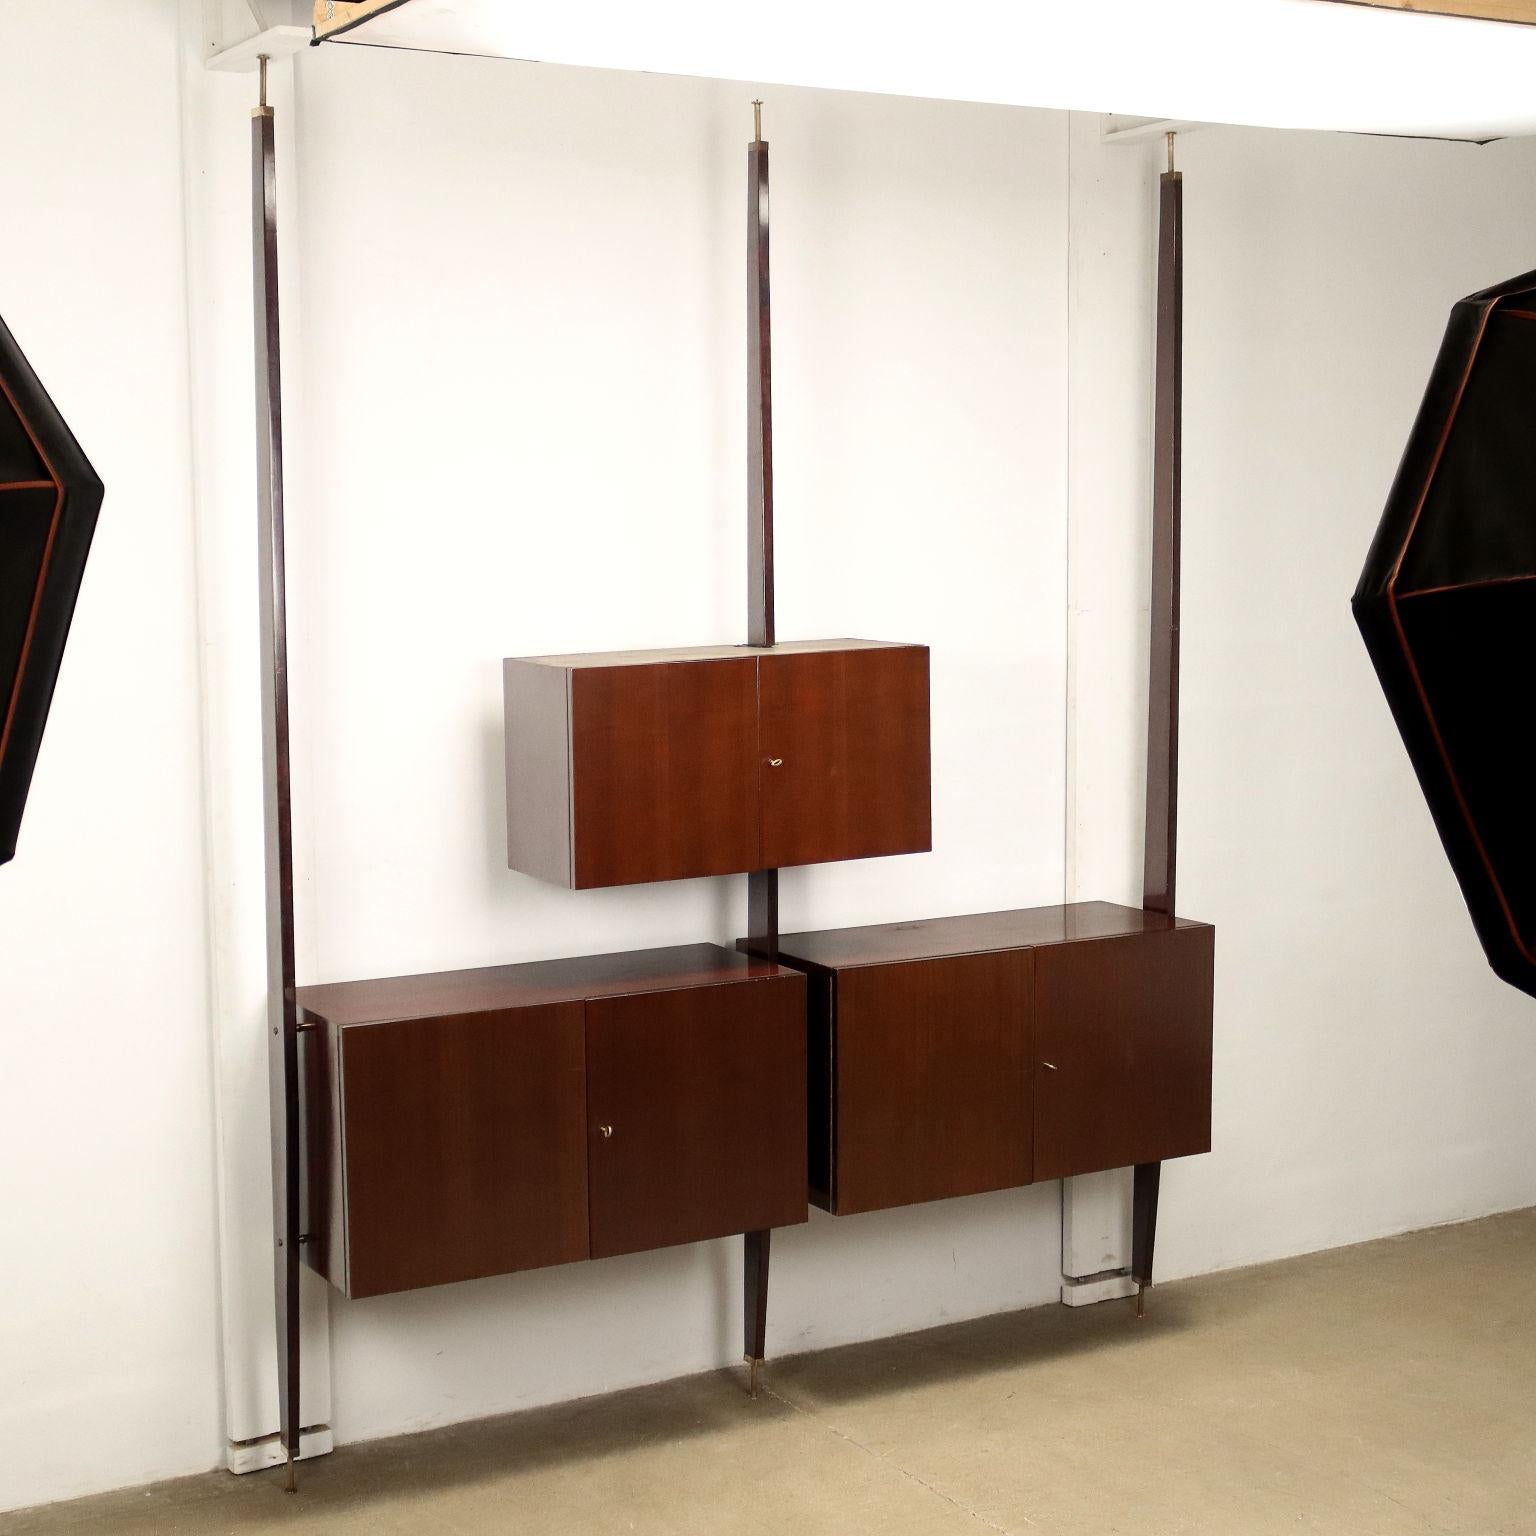 Wall unit with hinged doors in ebony-stained beech veneer.